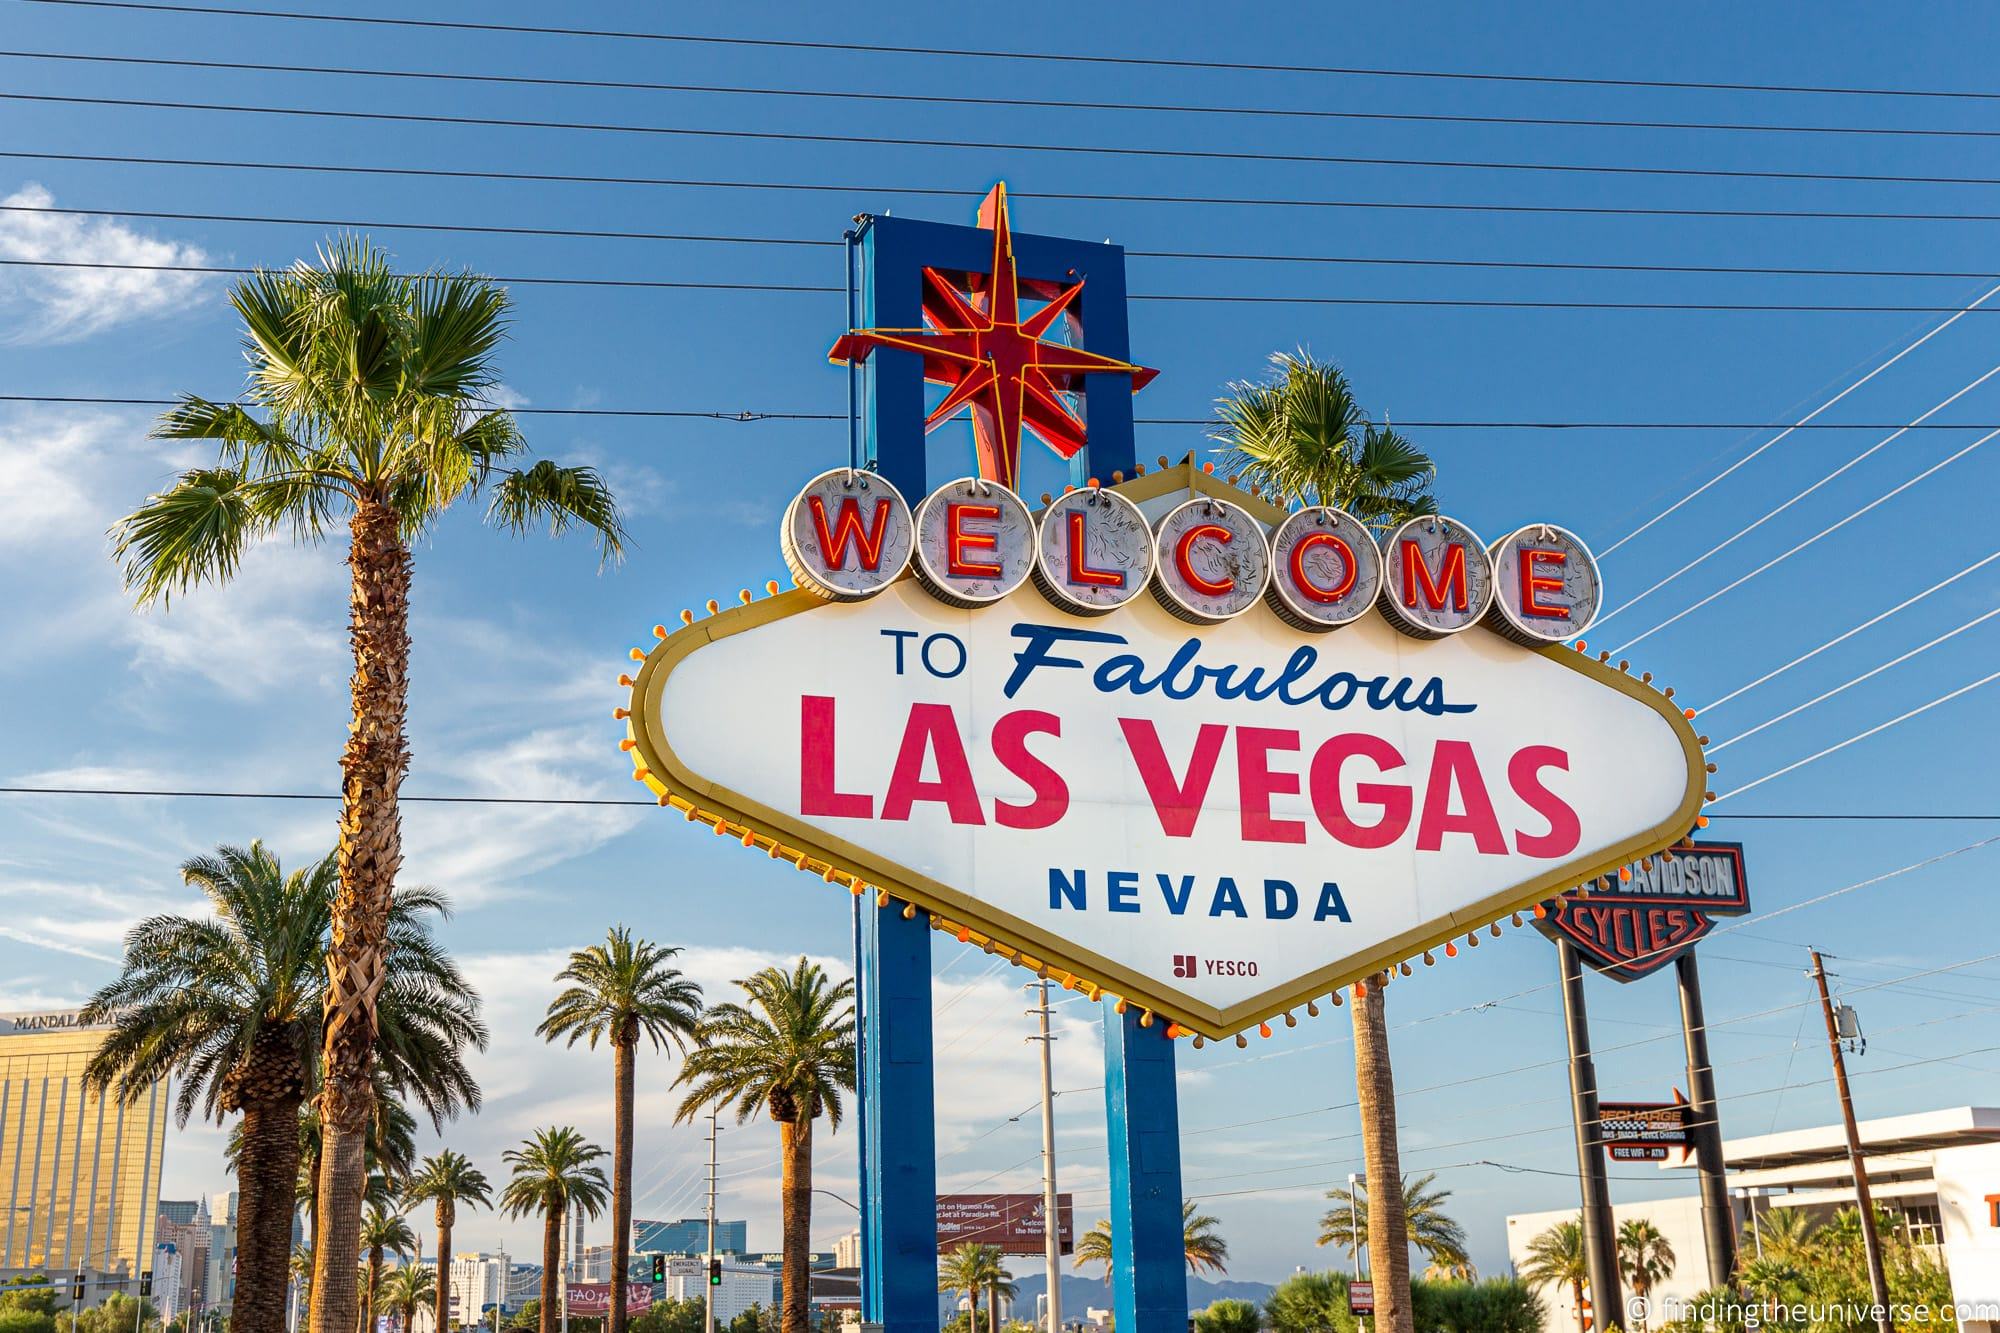 The Best Things to do in Las Vegas + Planning Tips and Advice